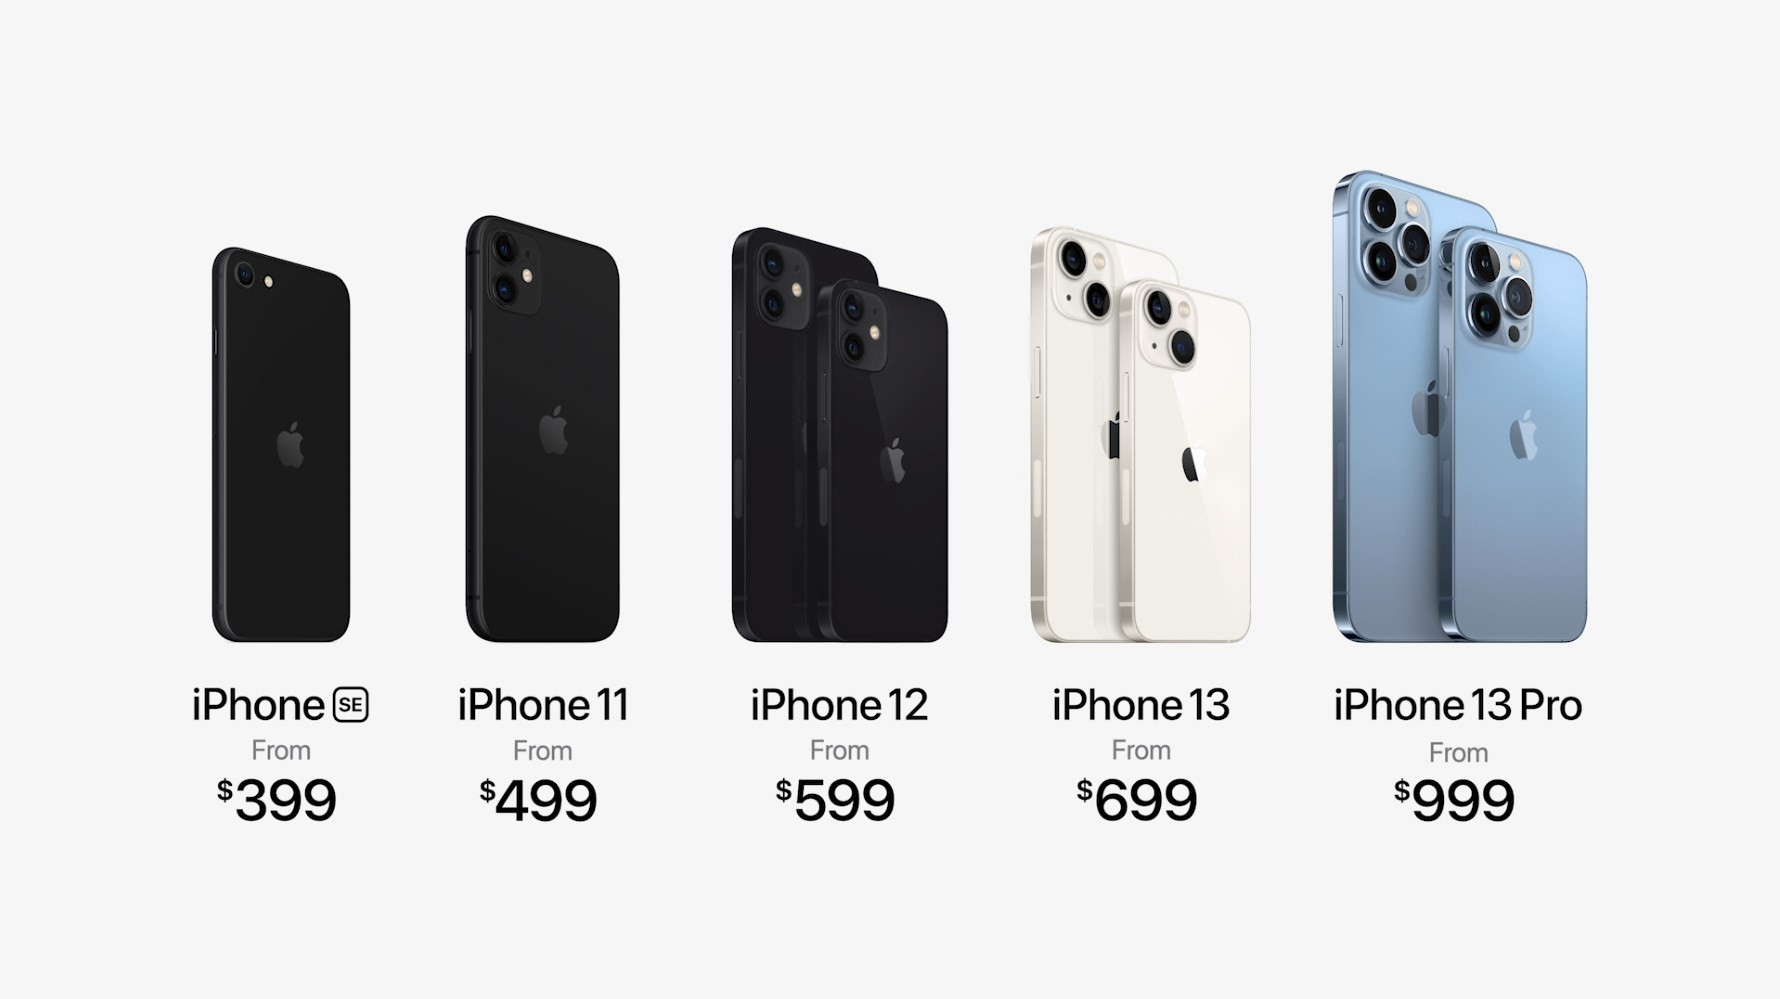 The new iPhone lineup, by price